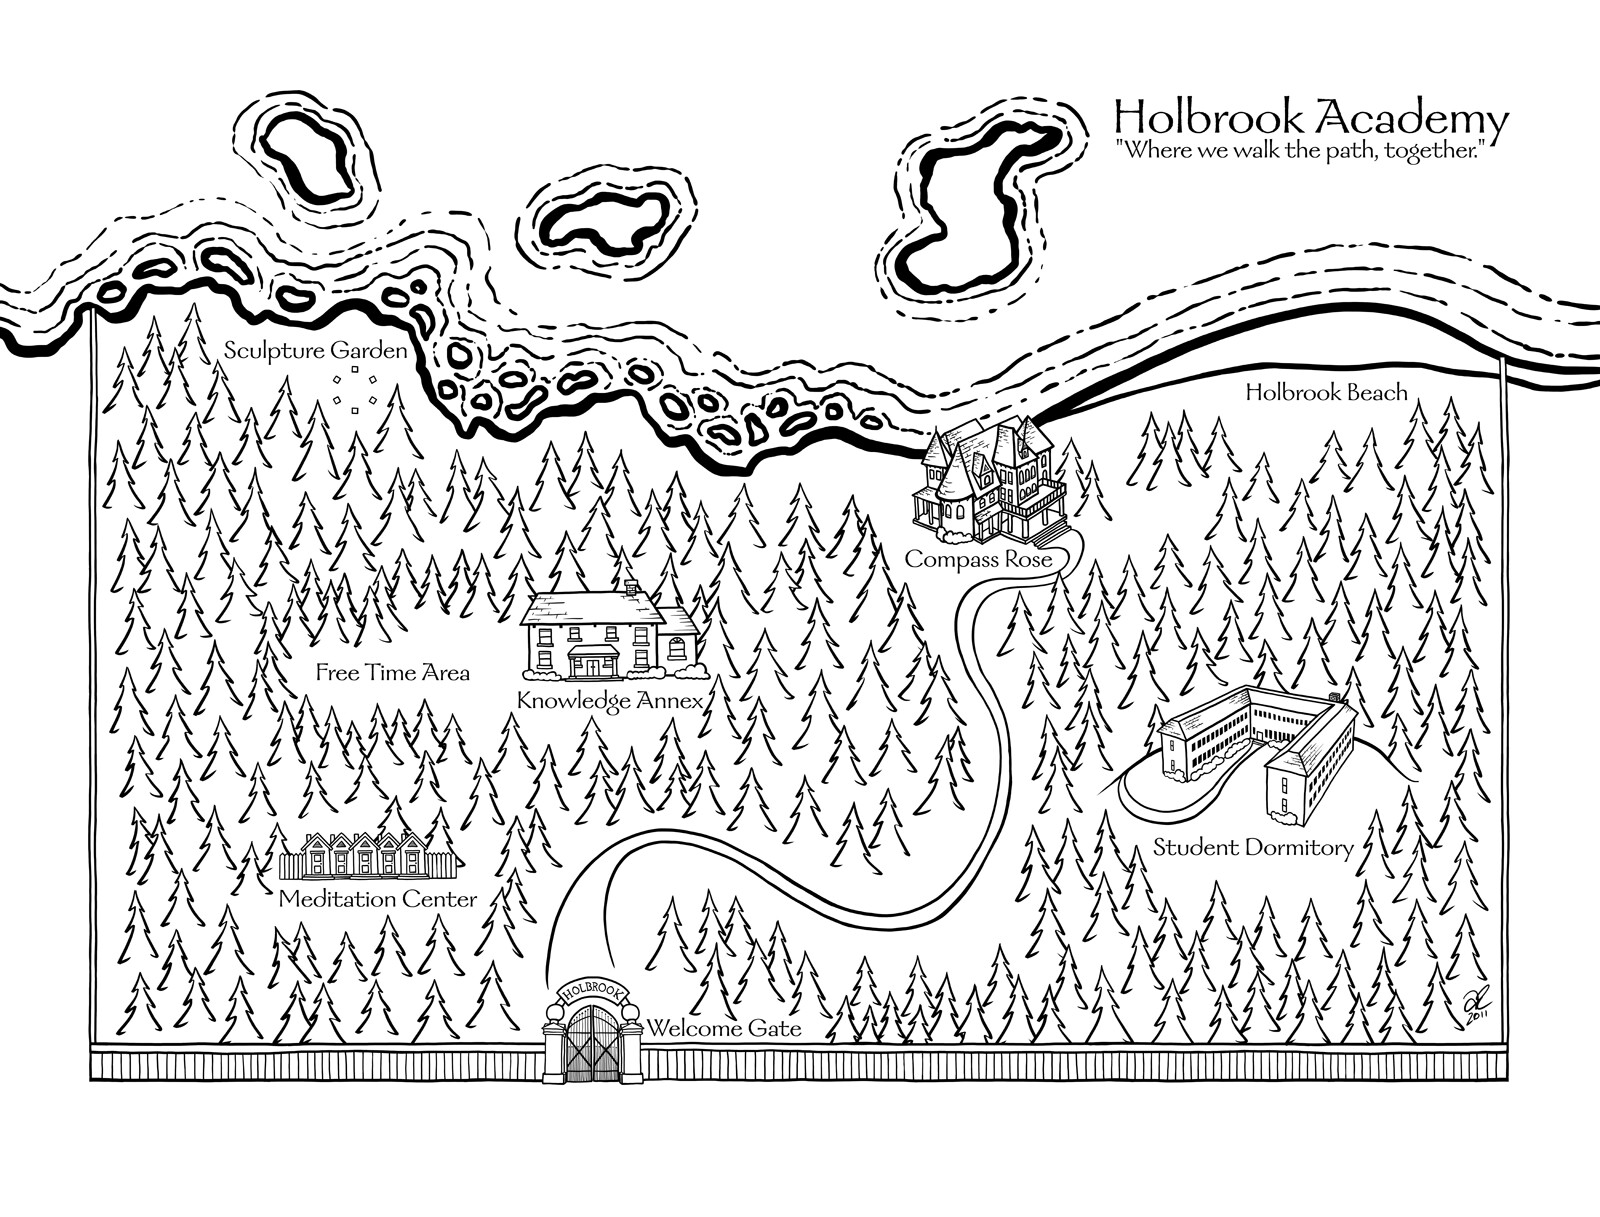 Holbrook Academy Campus Map